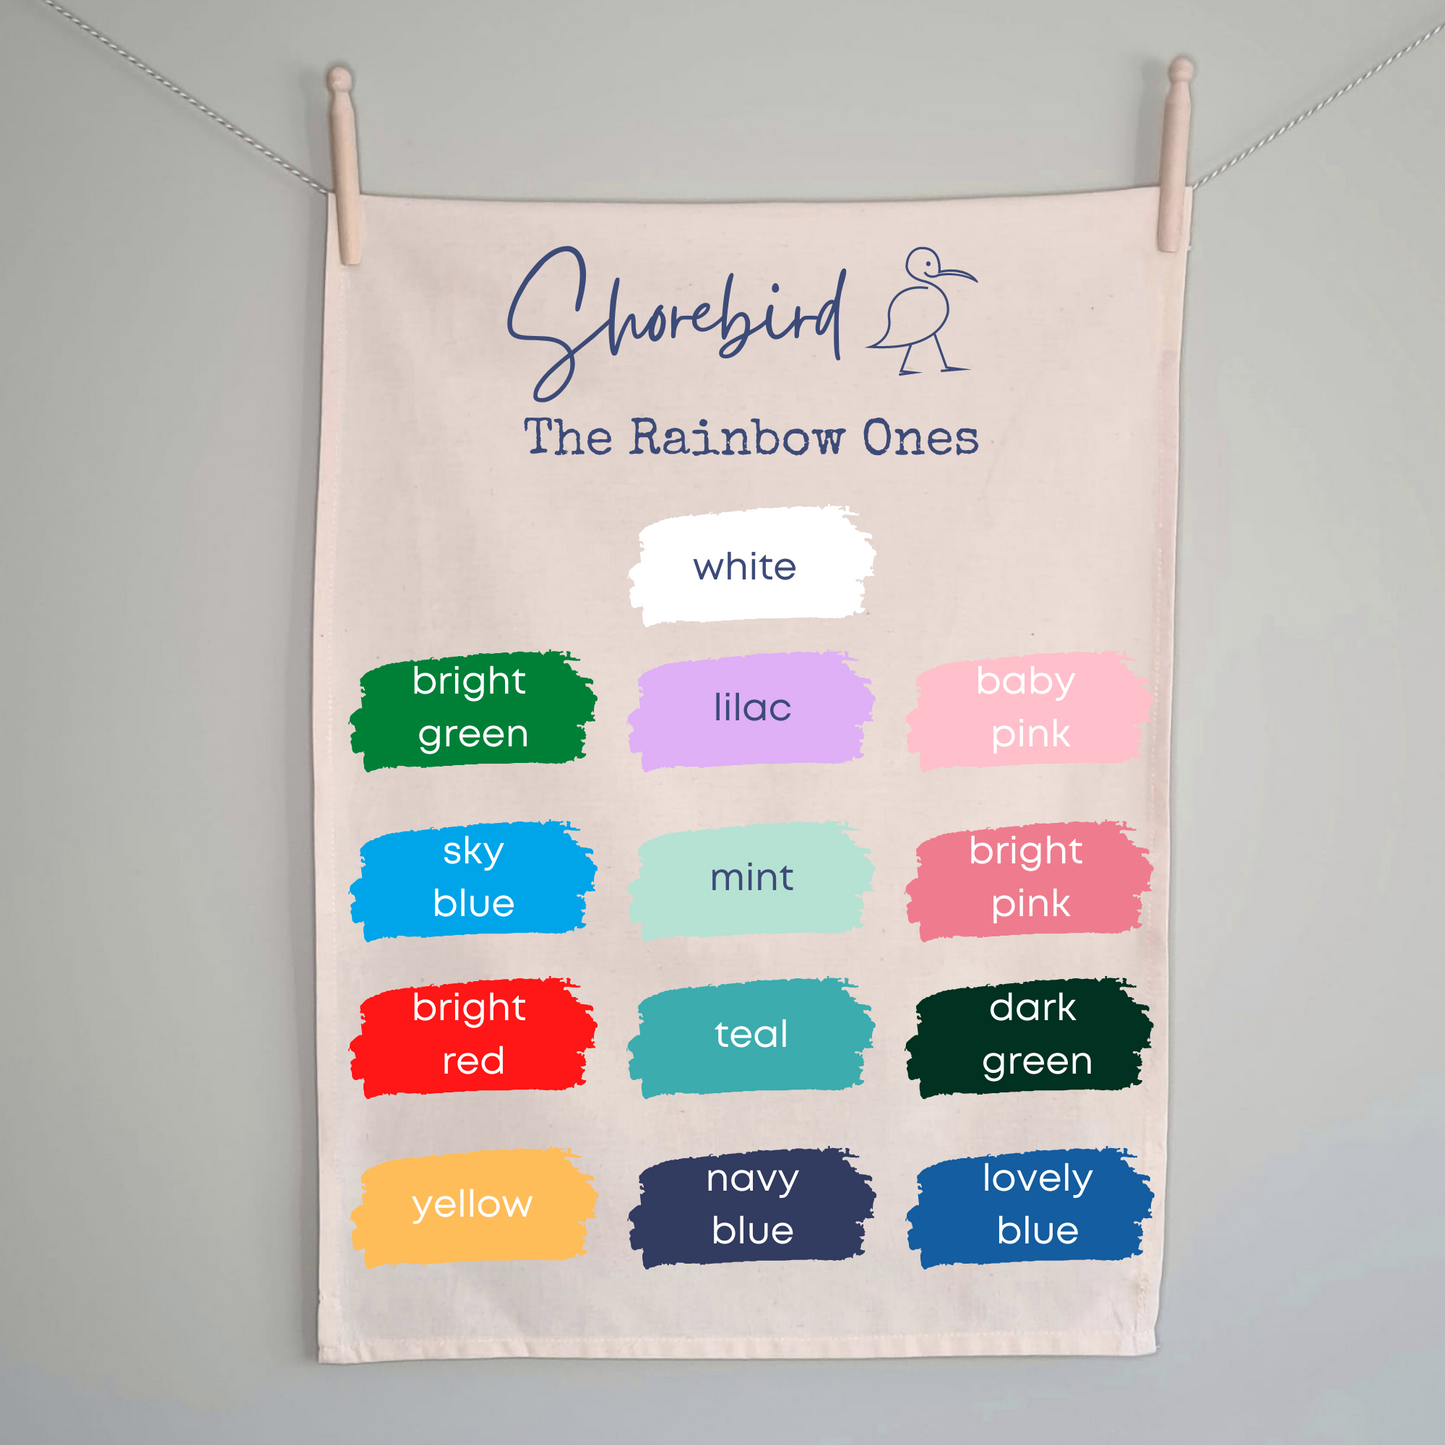 You Are Going To Be An Aunty Tea Towel - 100% Organic Cotton